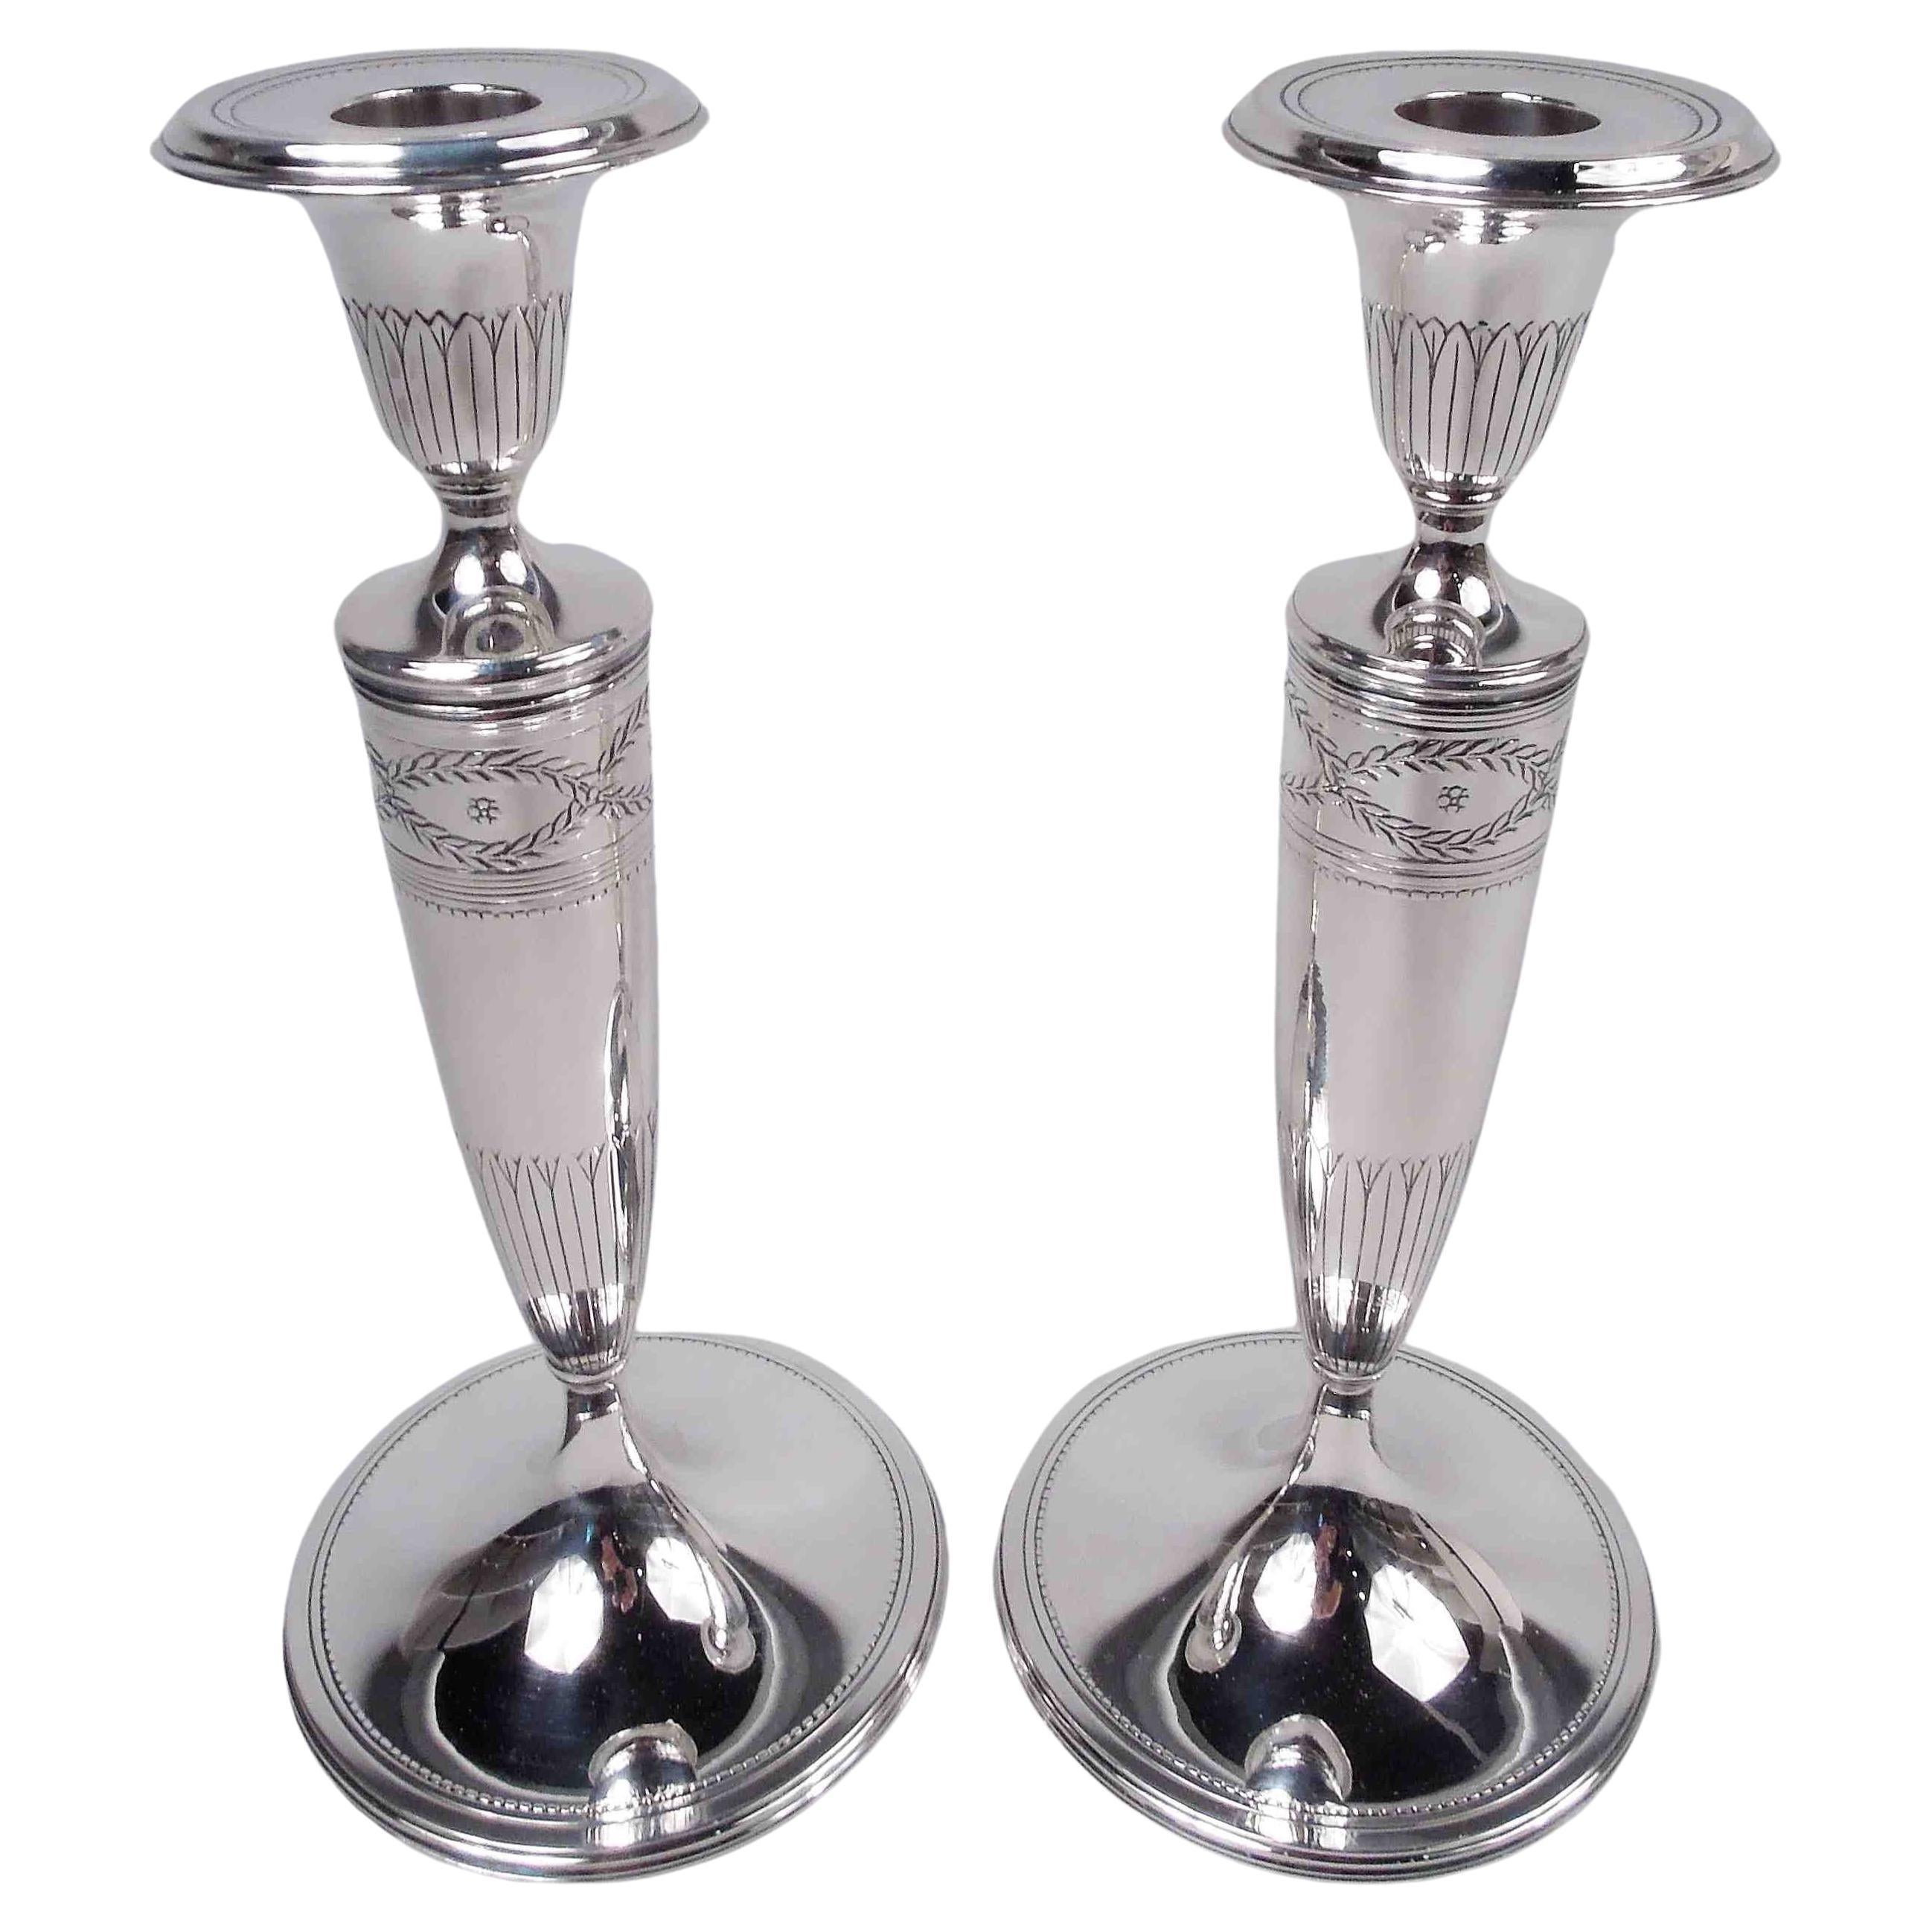 Pair of Antique Tiffany Winthrop Sterling Silver Candlesticks